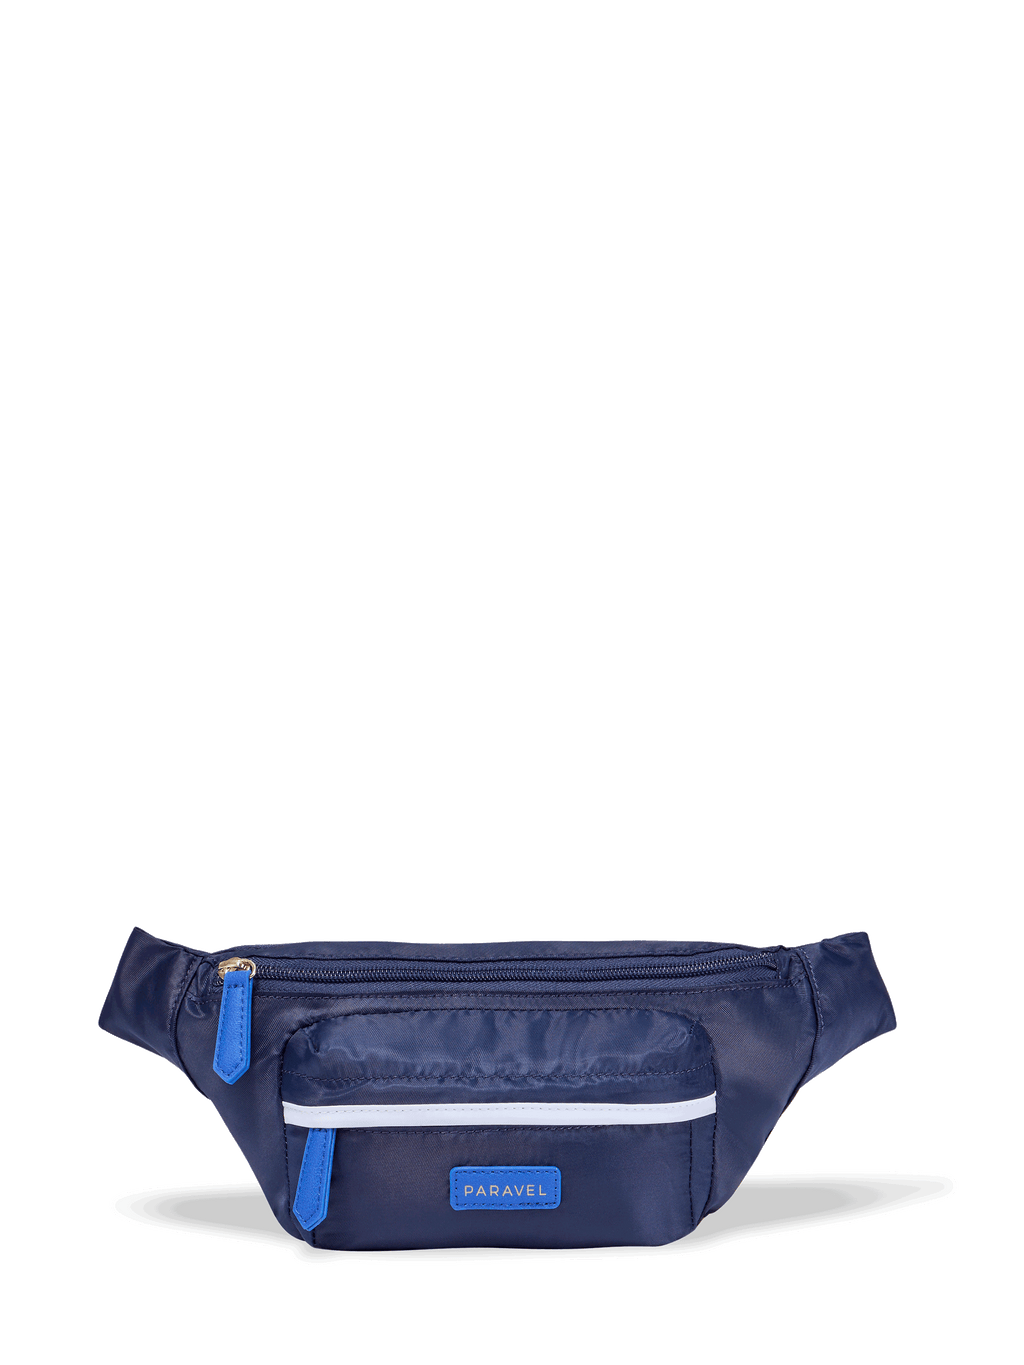 Hip Bags to Compliment your style